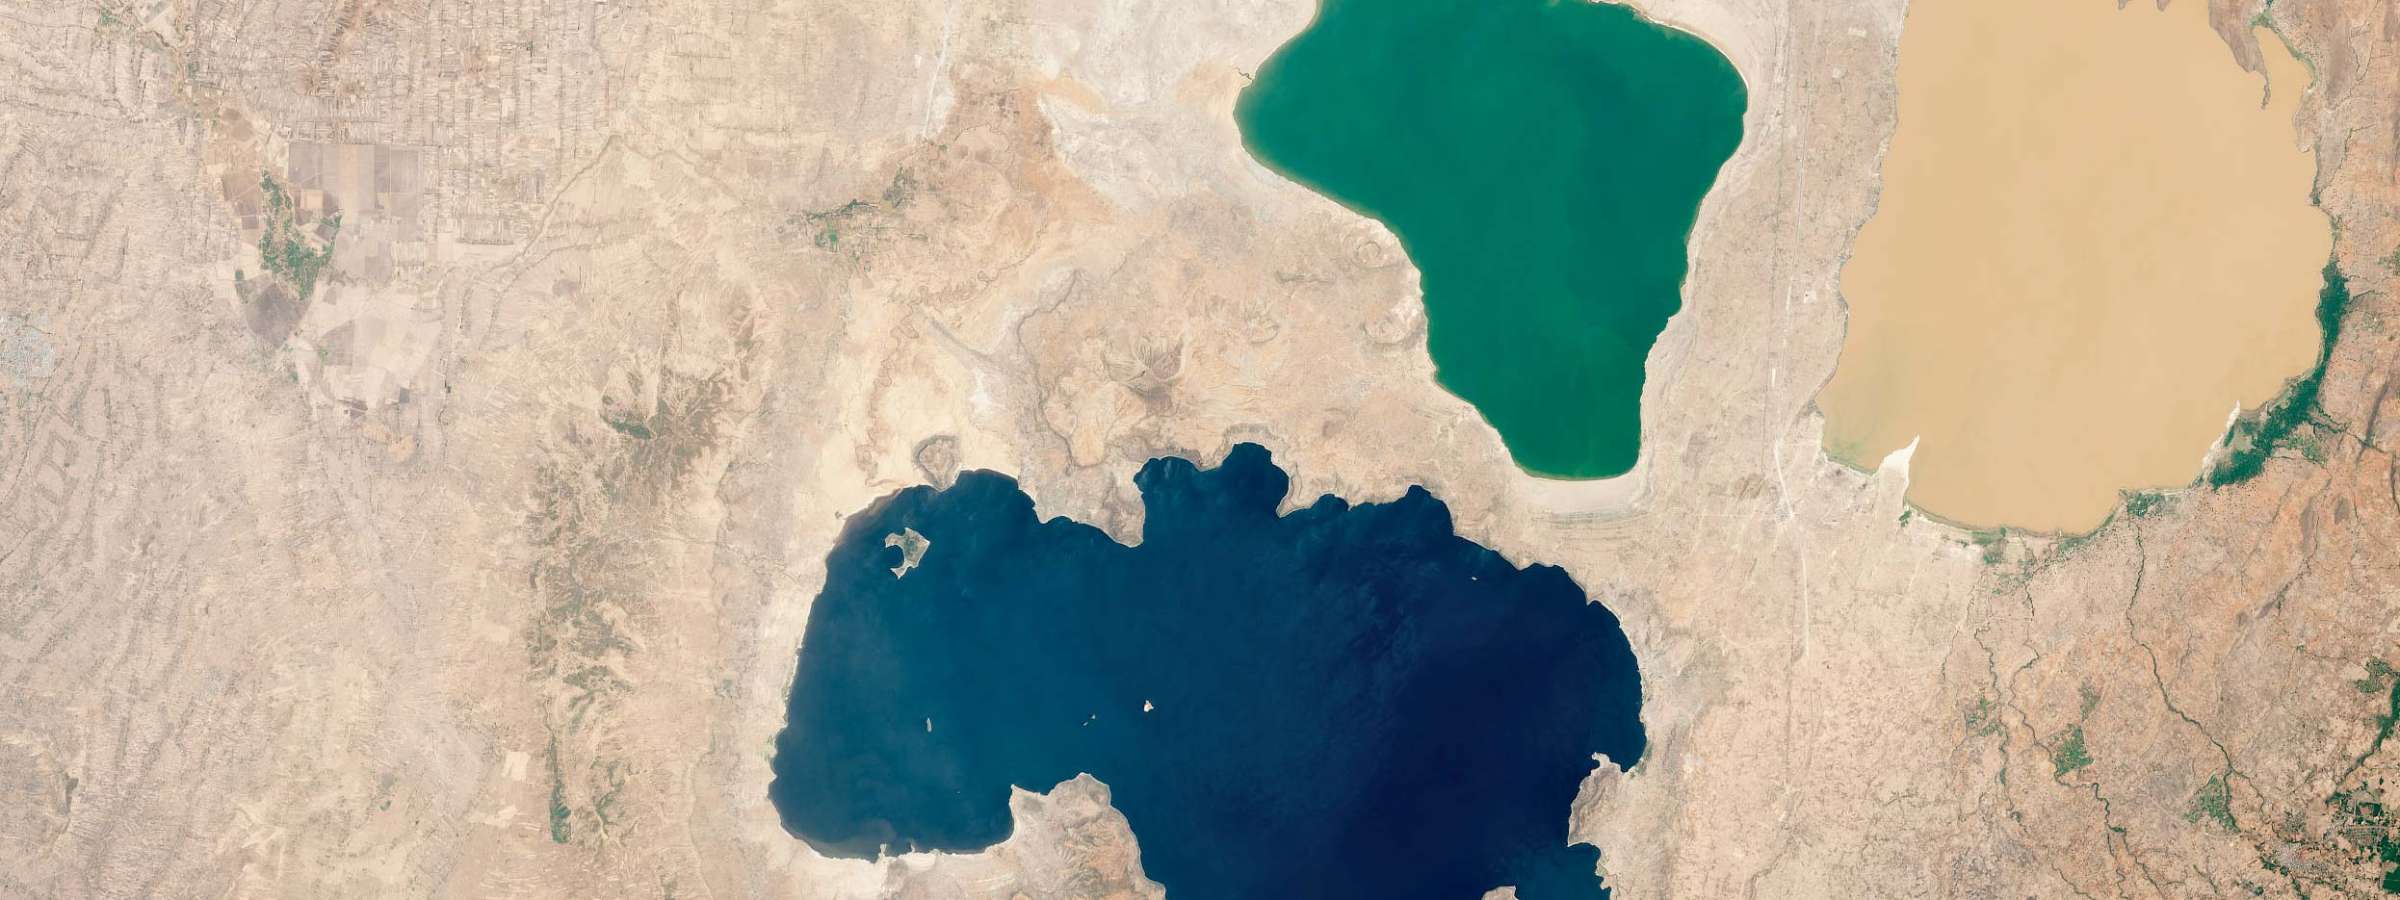 An inland sea once connected the lakes, but they now have different appearances and water chemistries.